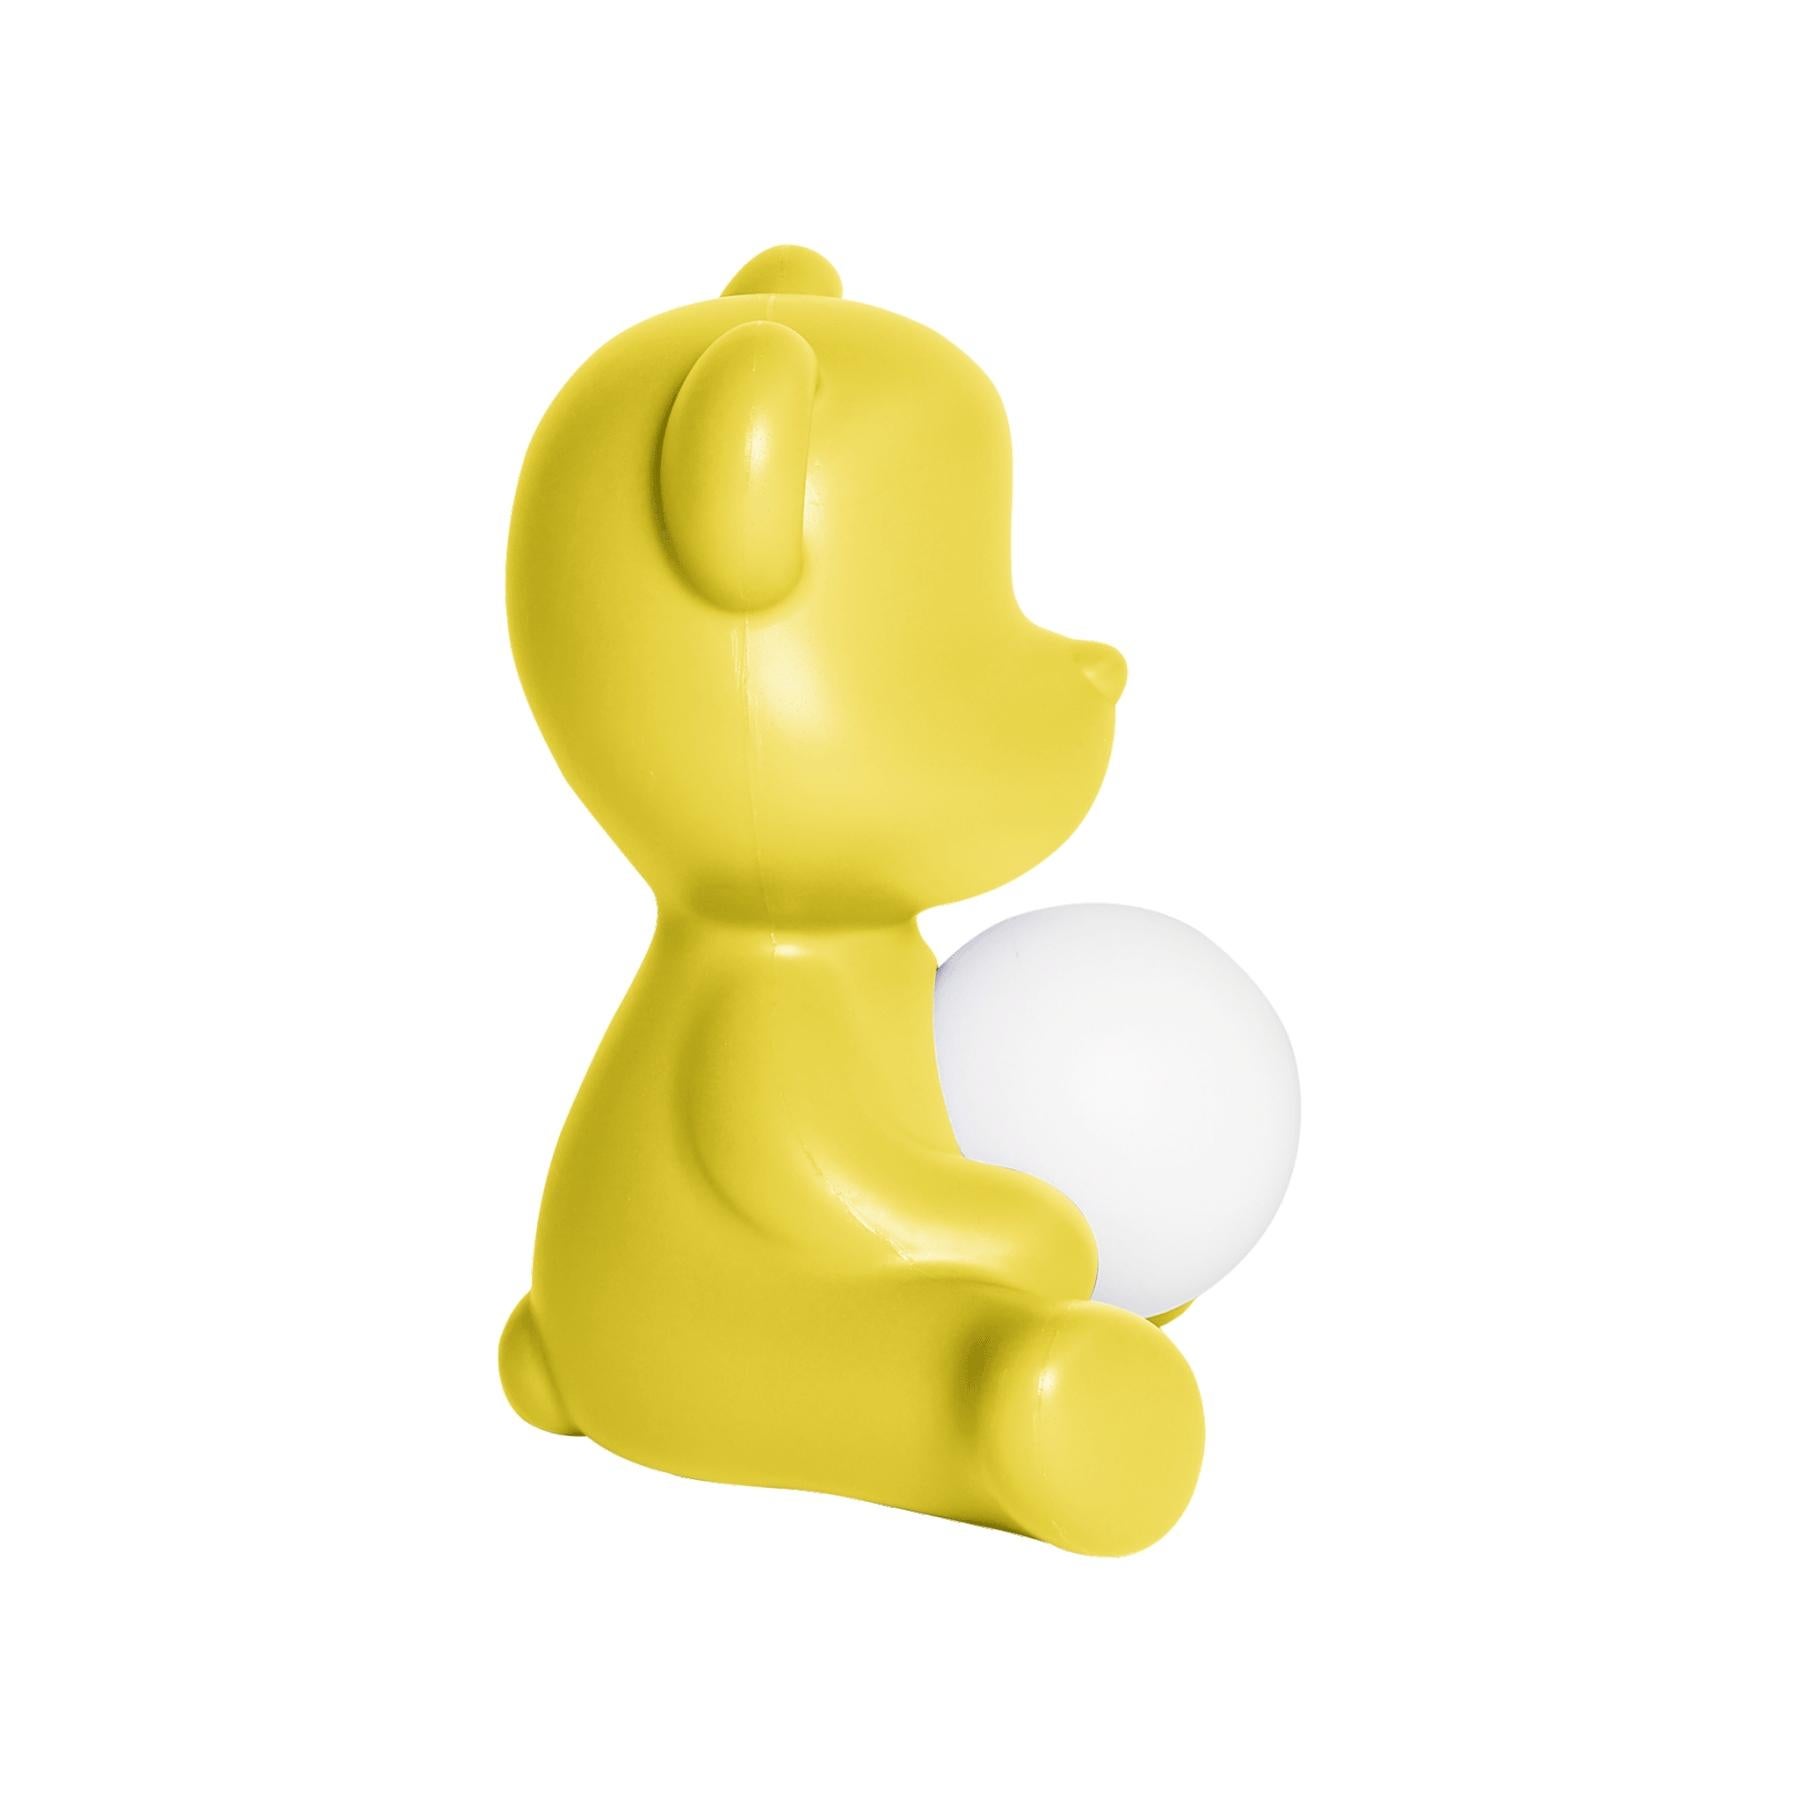 Plastic In Stock in Los Angeles, Yellow Teddy Bear Lamp LED Rechargeable